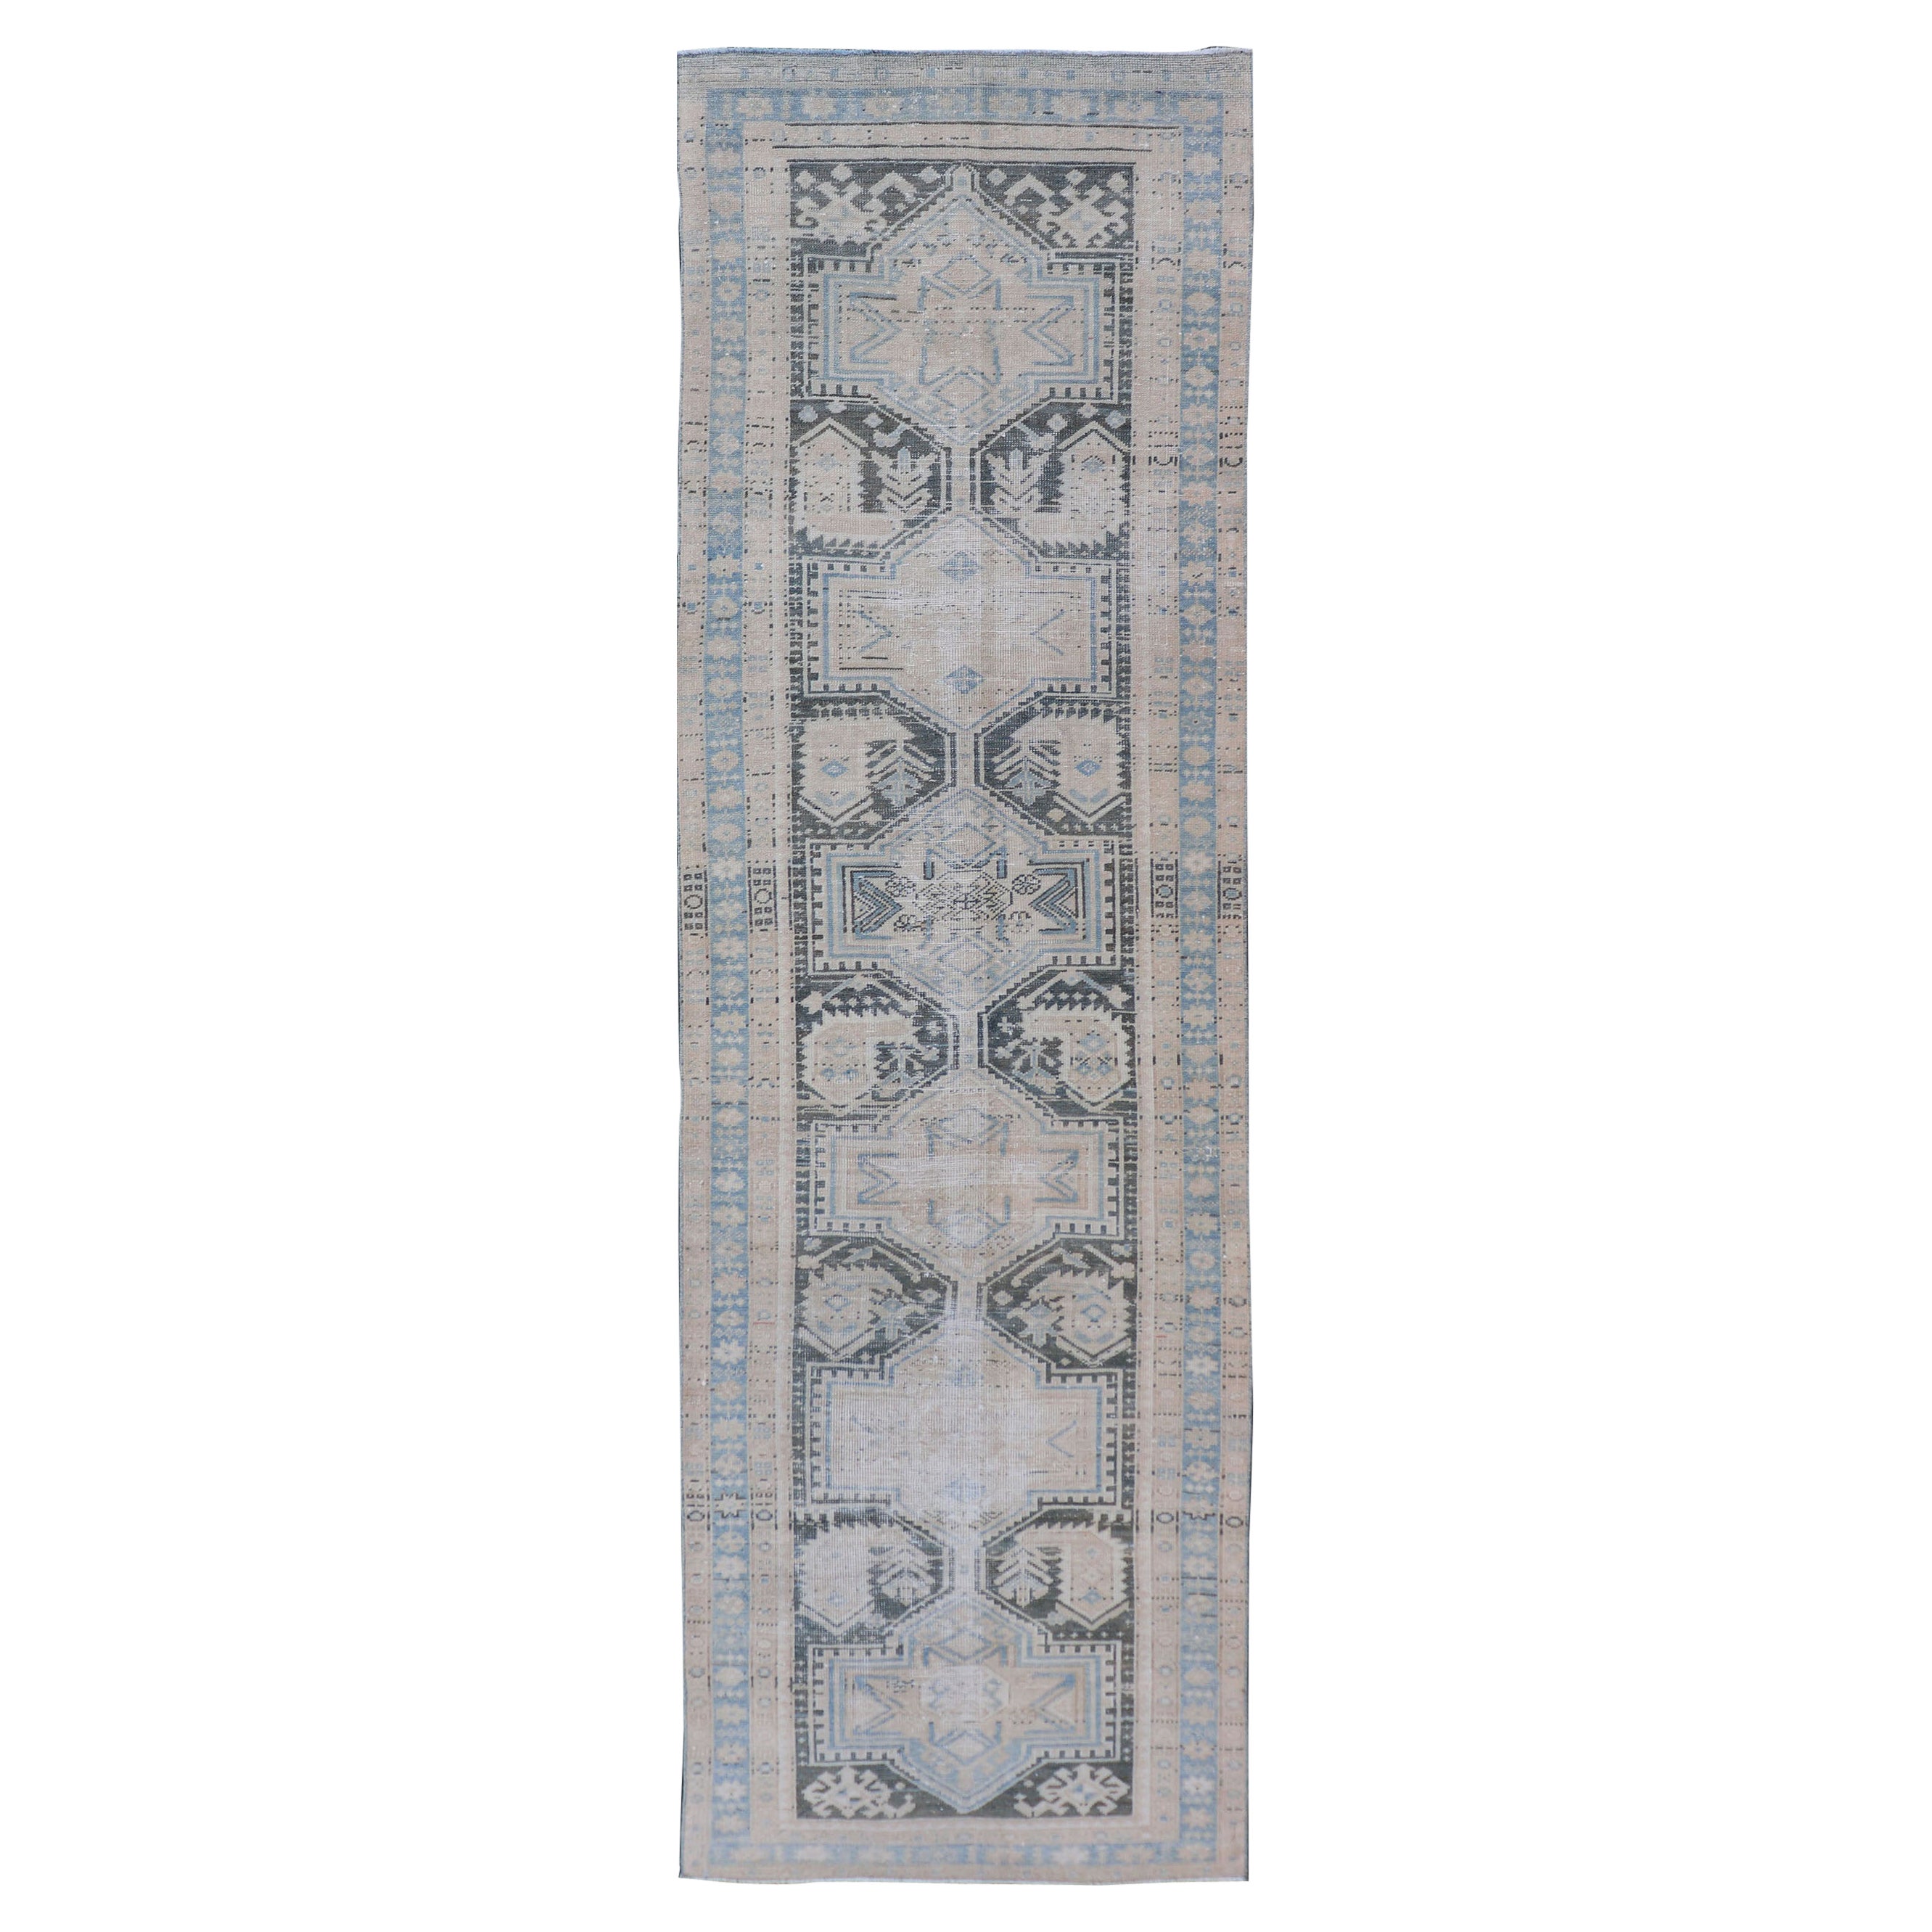 Antique Persian Hamadan Runner with All-Over Medallion Design in Lt. Blue 